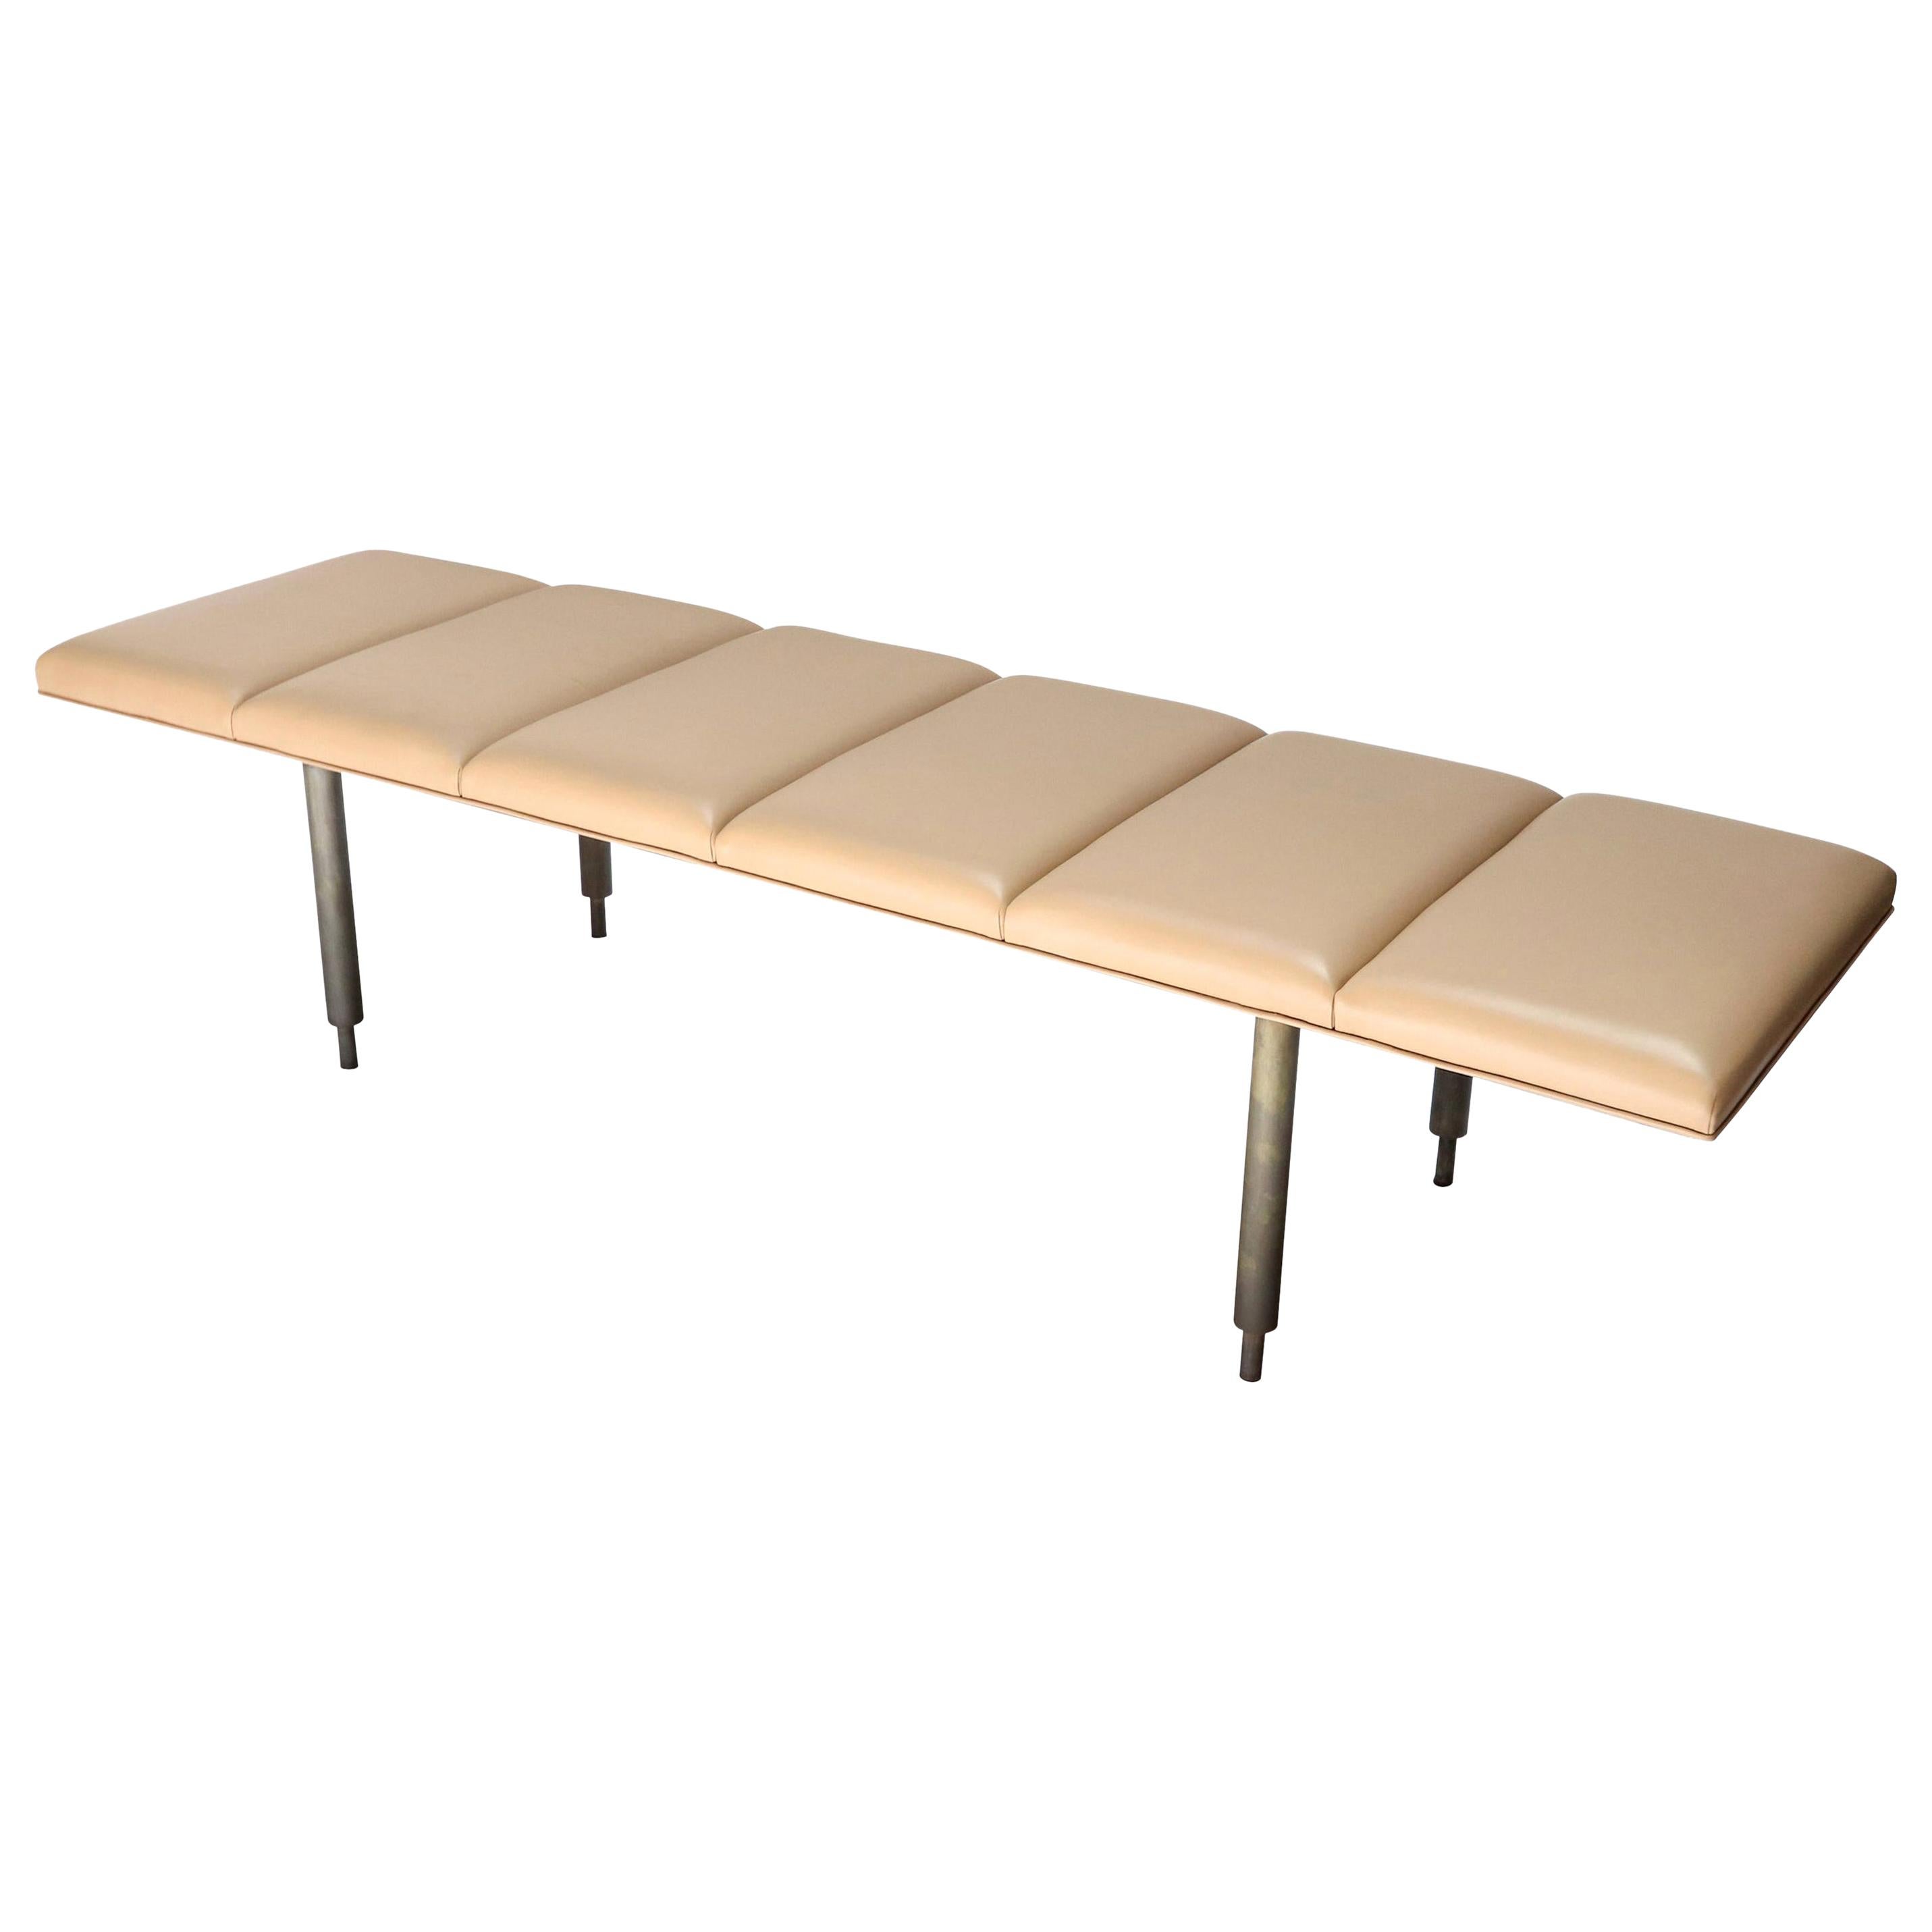 Milano Custom Brass Metal Bench with Beige Leather Seat by Adesso Imports